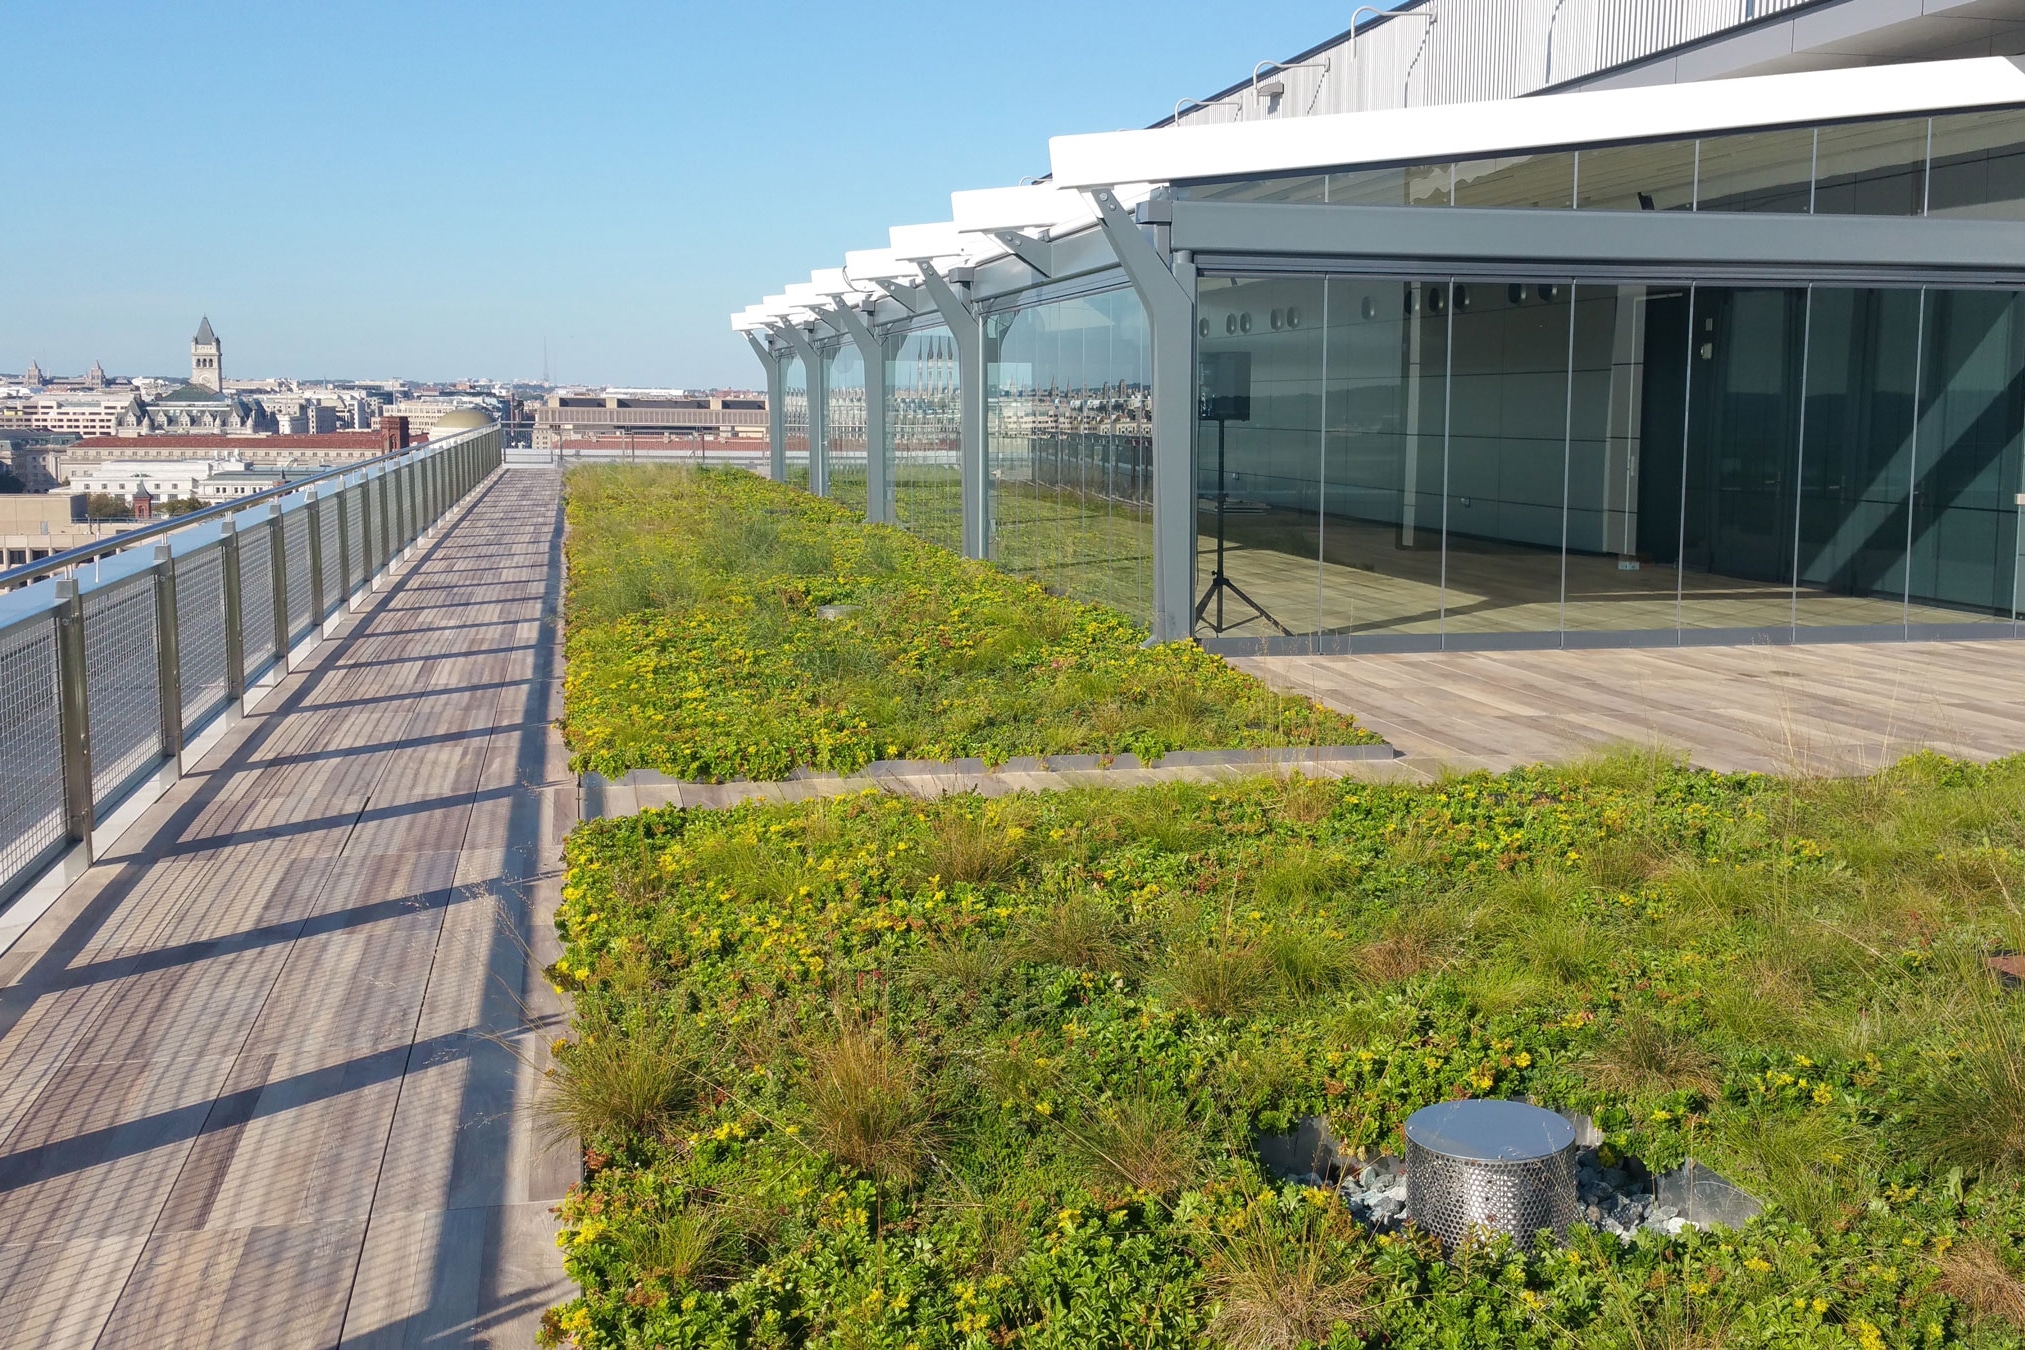 How Modular Plant Trays Simplify Green Roof Design